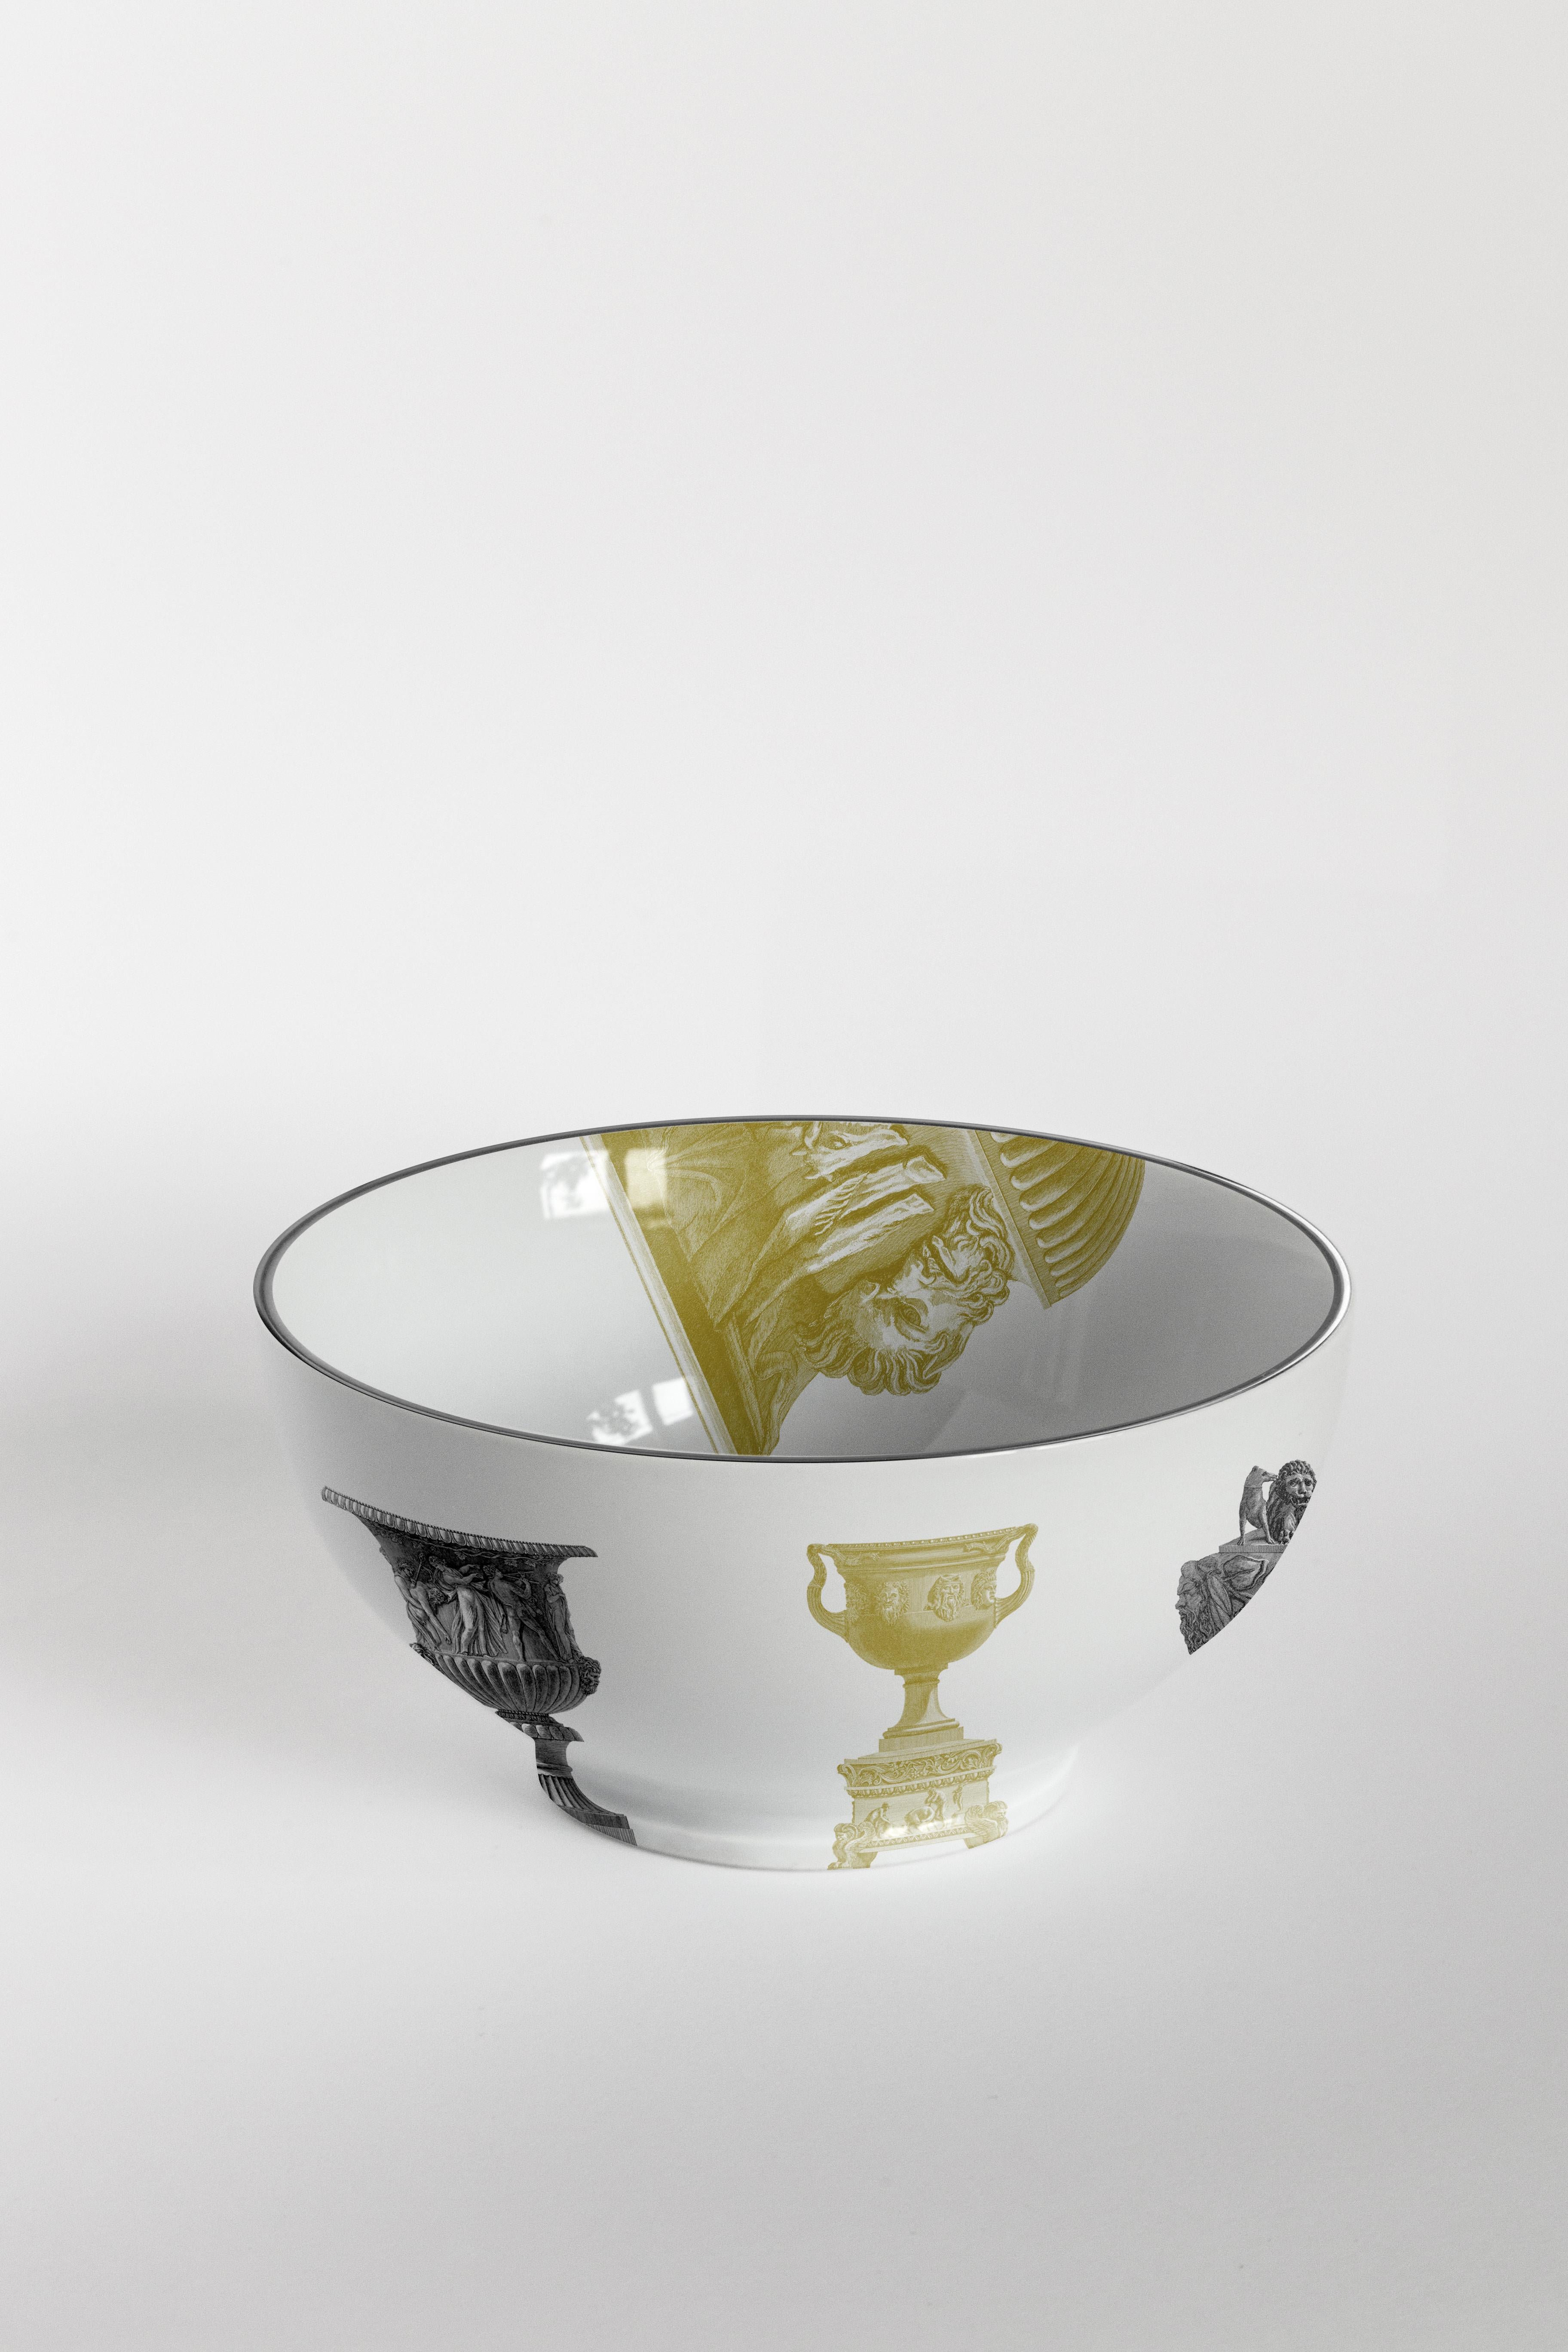 Italian Roma, Six Contemporary Porcelain bowls with Decorative Design For Sale